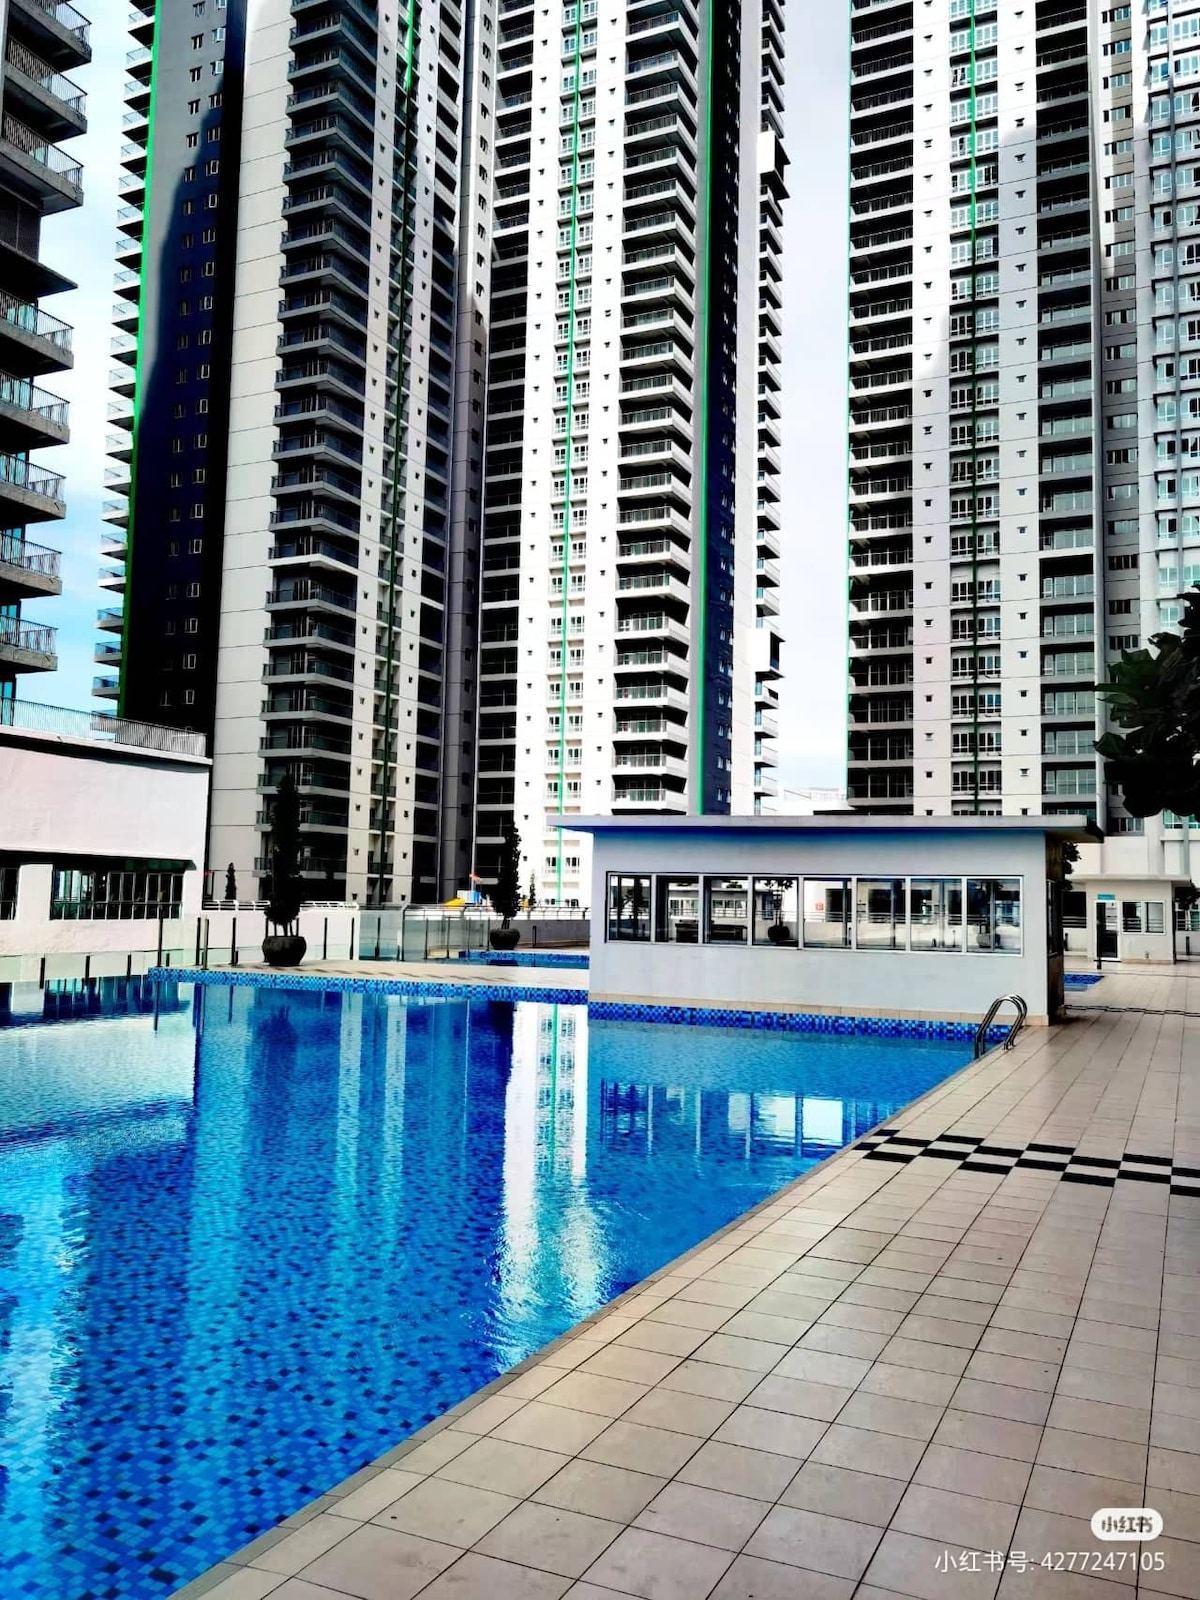 Commercial Aparment in Kuala Lumpur